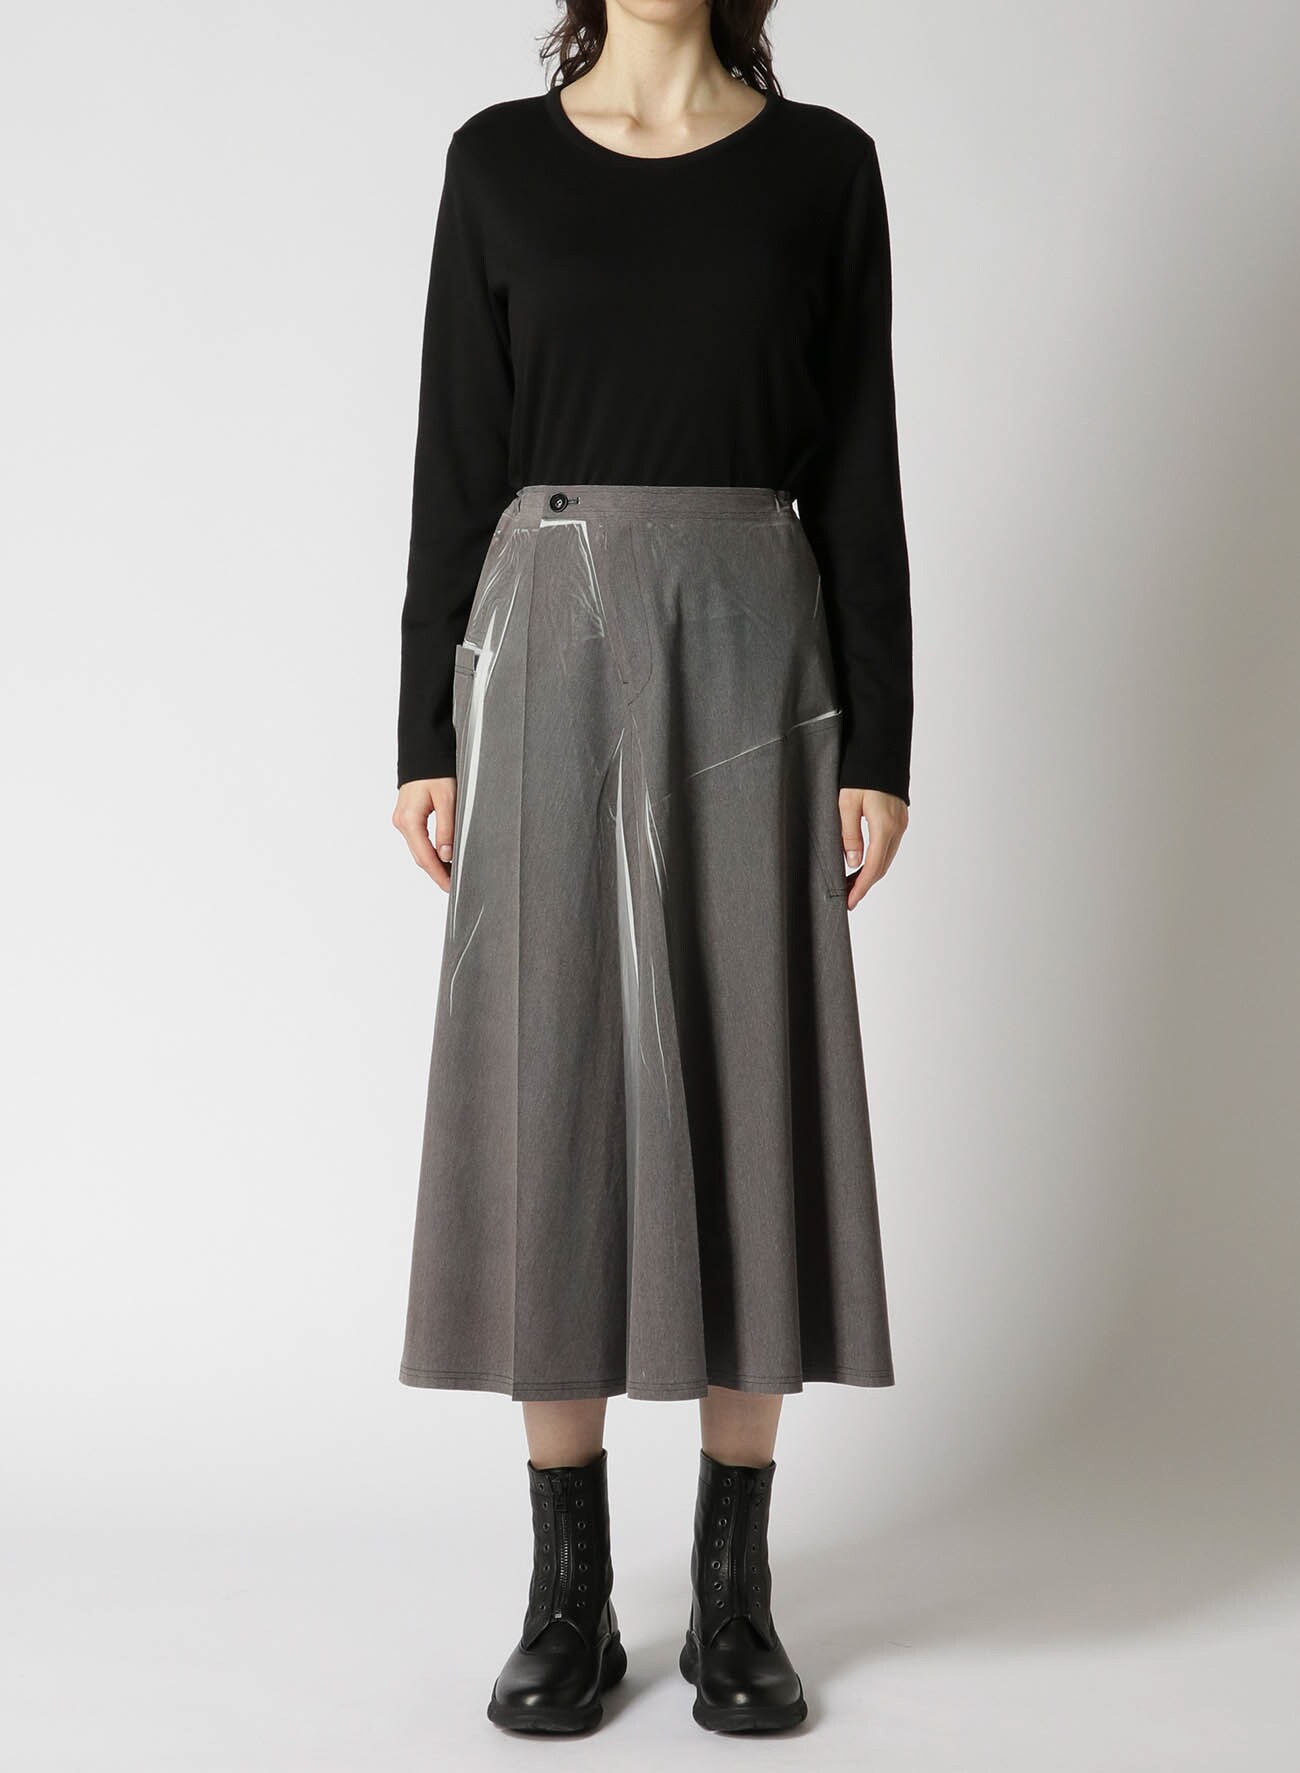 TRICOT TRANSFERRED PRINT PATCH SKIRT